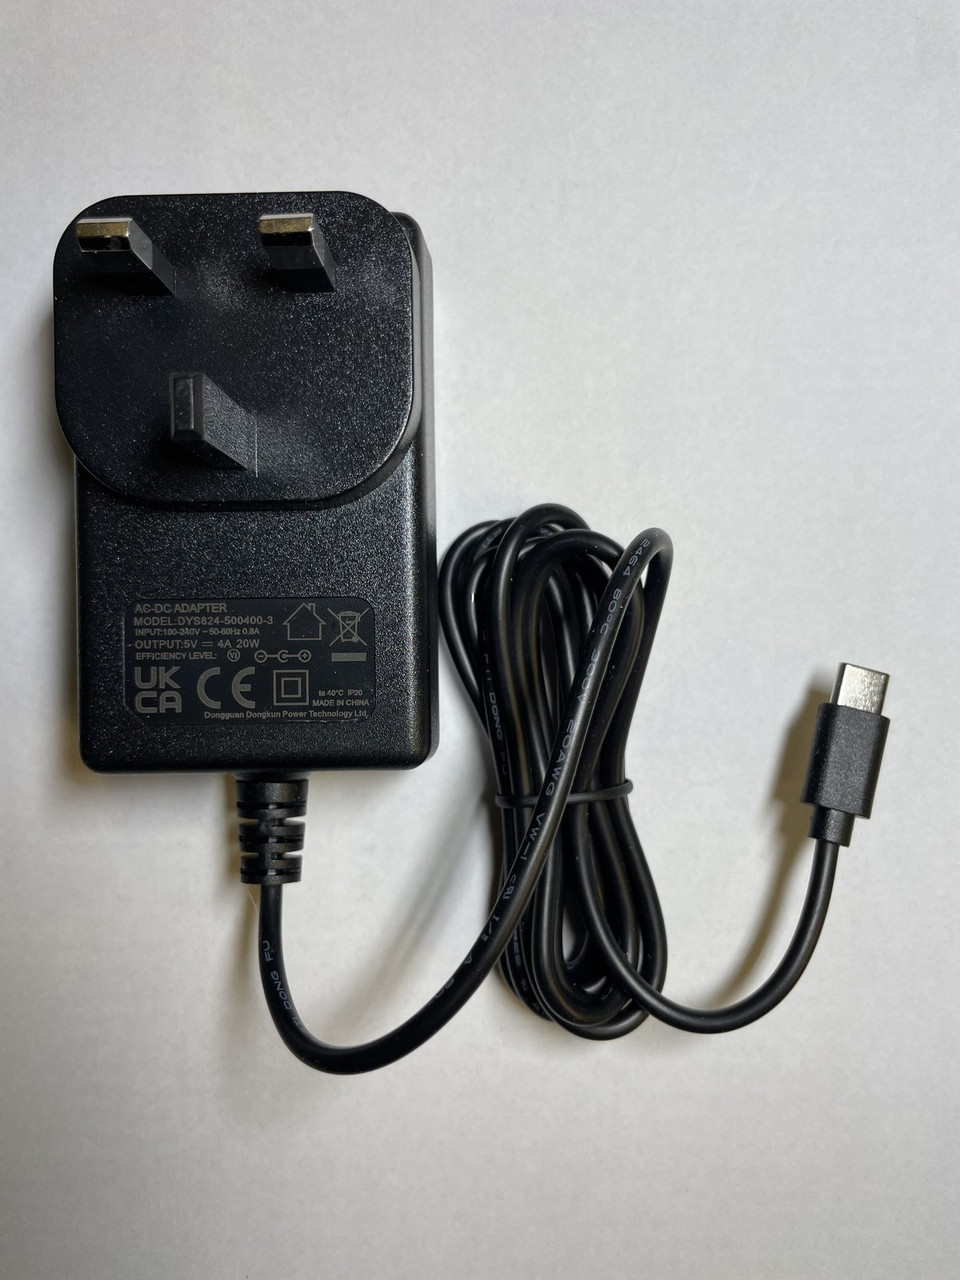 UK 5V 4A AC-DC Adaptor Power Supply Charger with USBC USB-C Connector